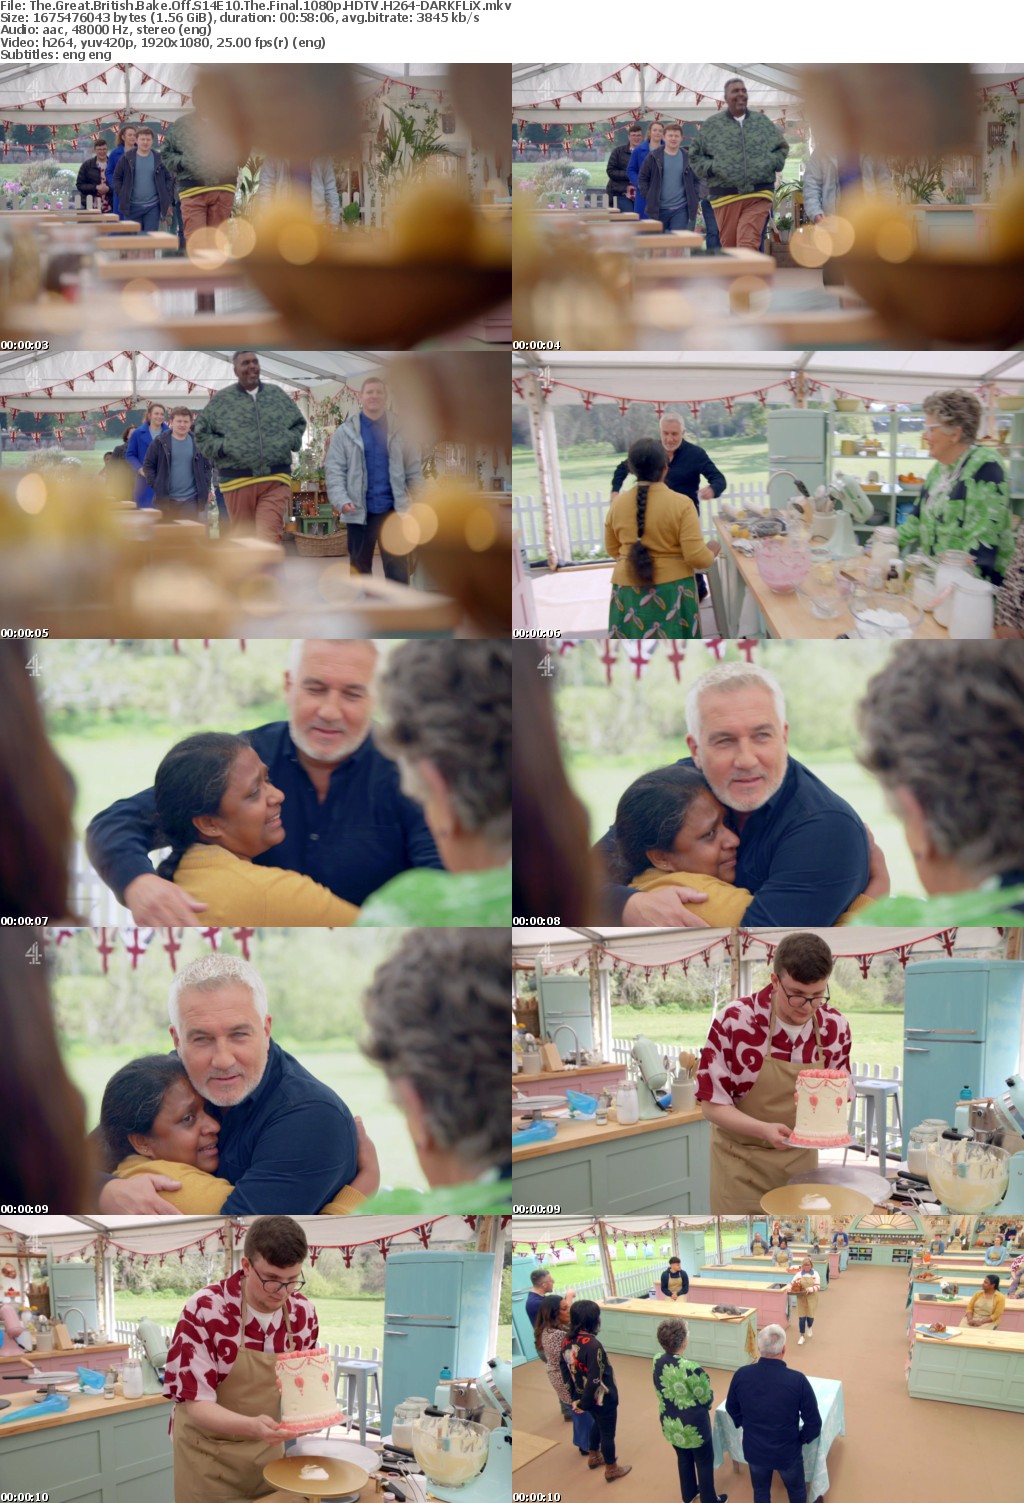 The Great British Bake Off S14E10 The Final 1080p HDTV H264-DARKFLiX